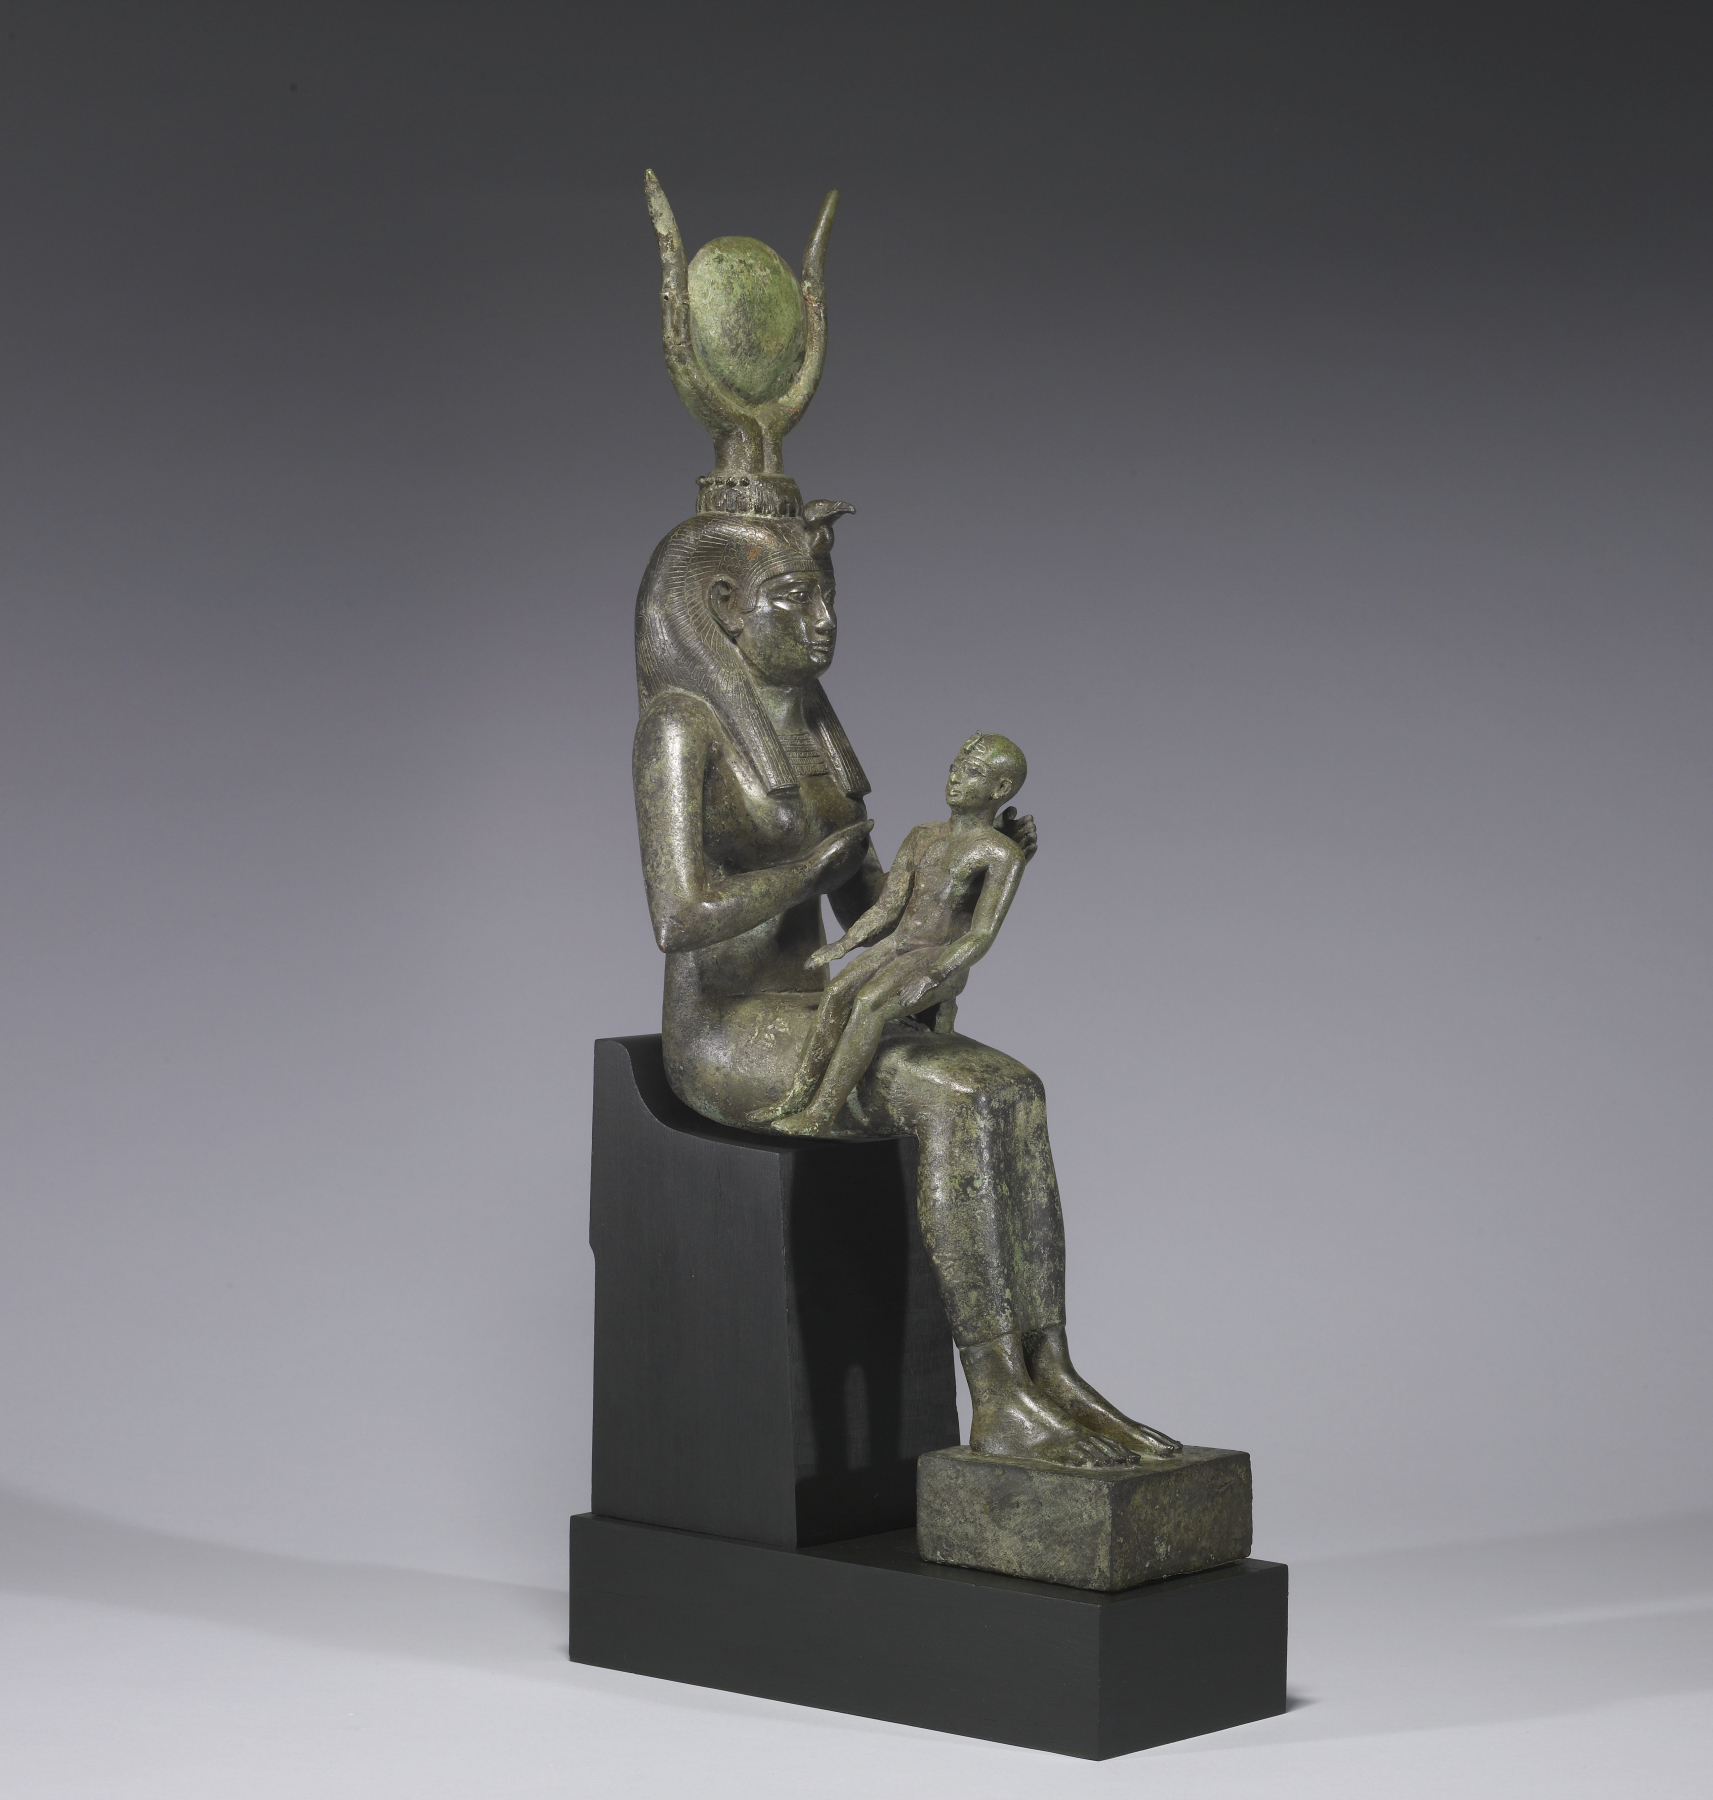 A statue made of bronze of Isis sitting and holding her son Horus.